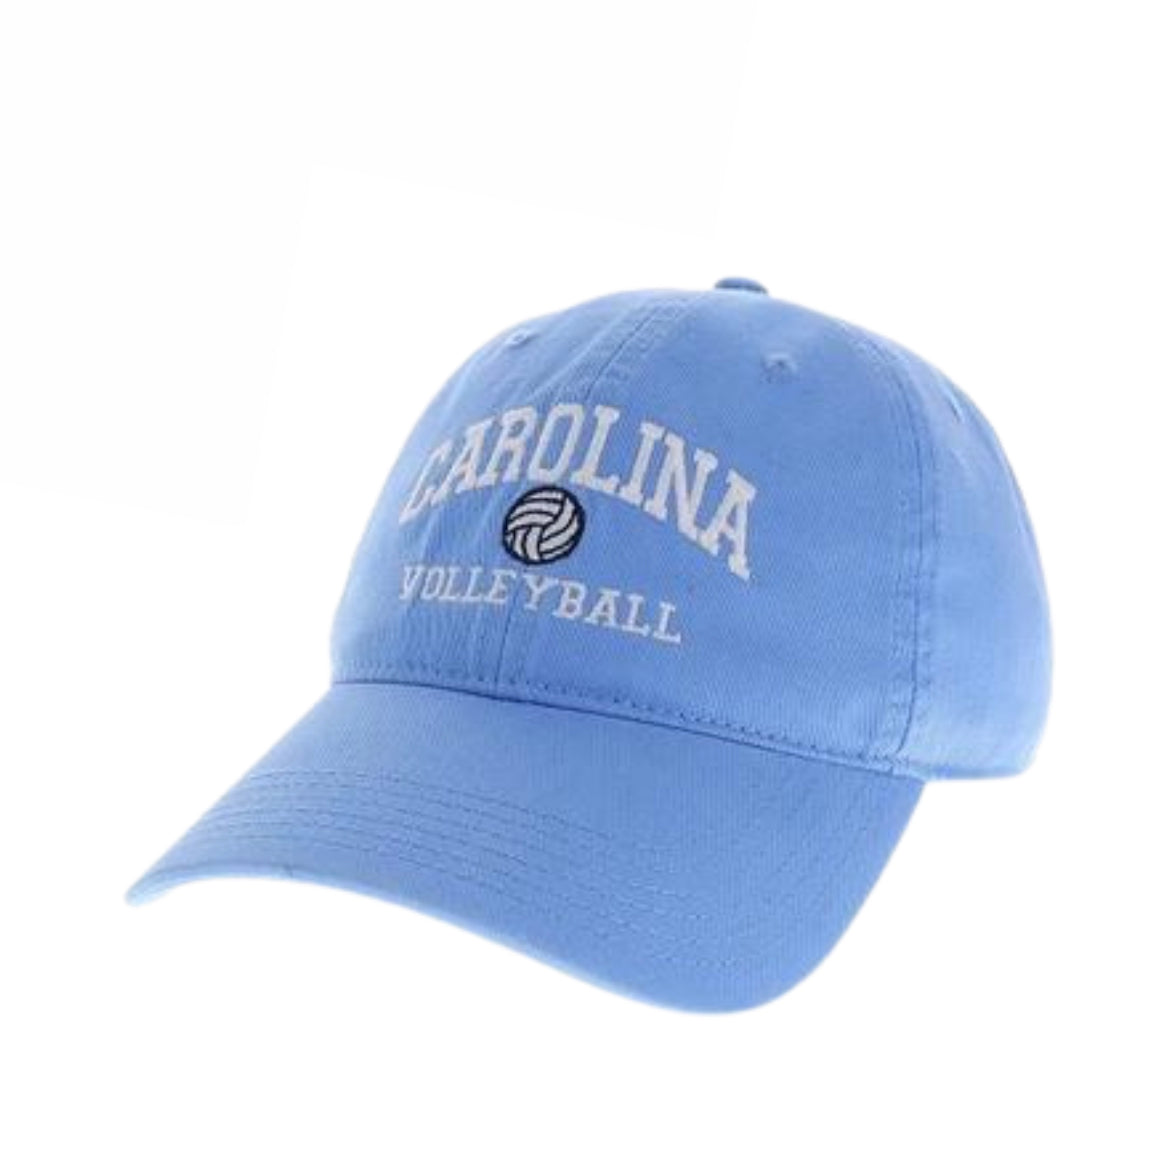 Carolina Volleyball Hat by Legacy - UNC Sport Hat